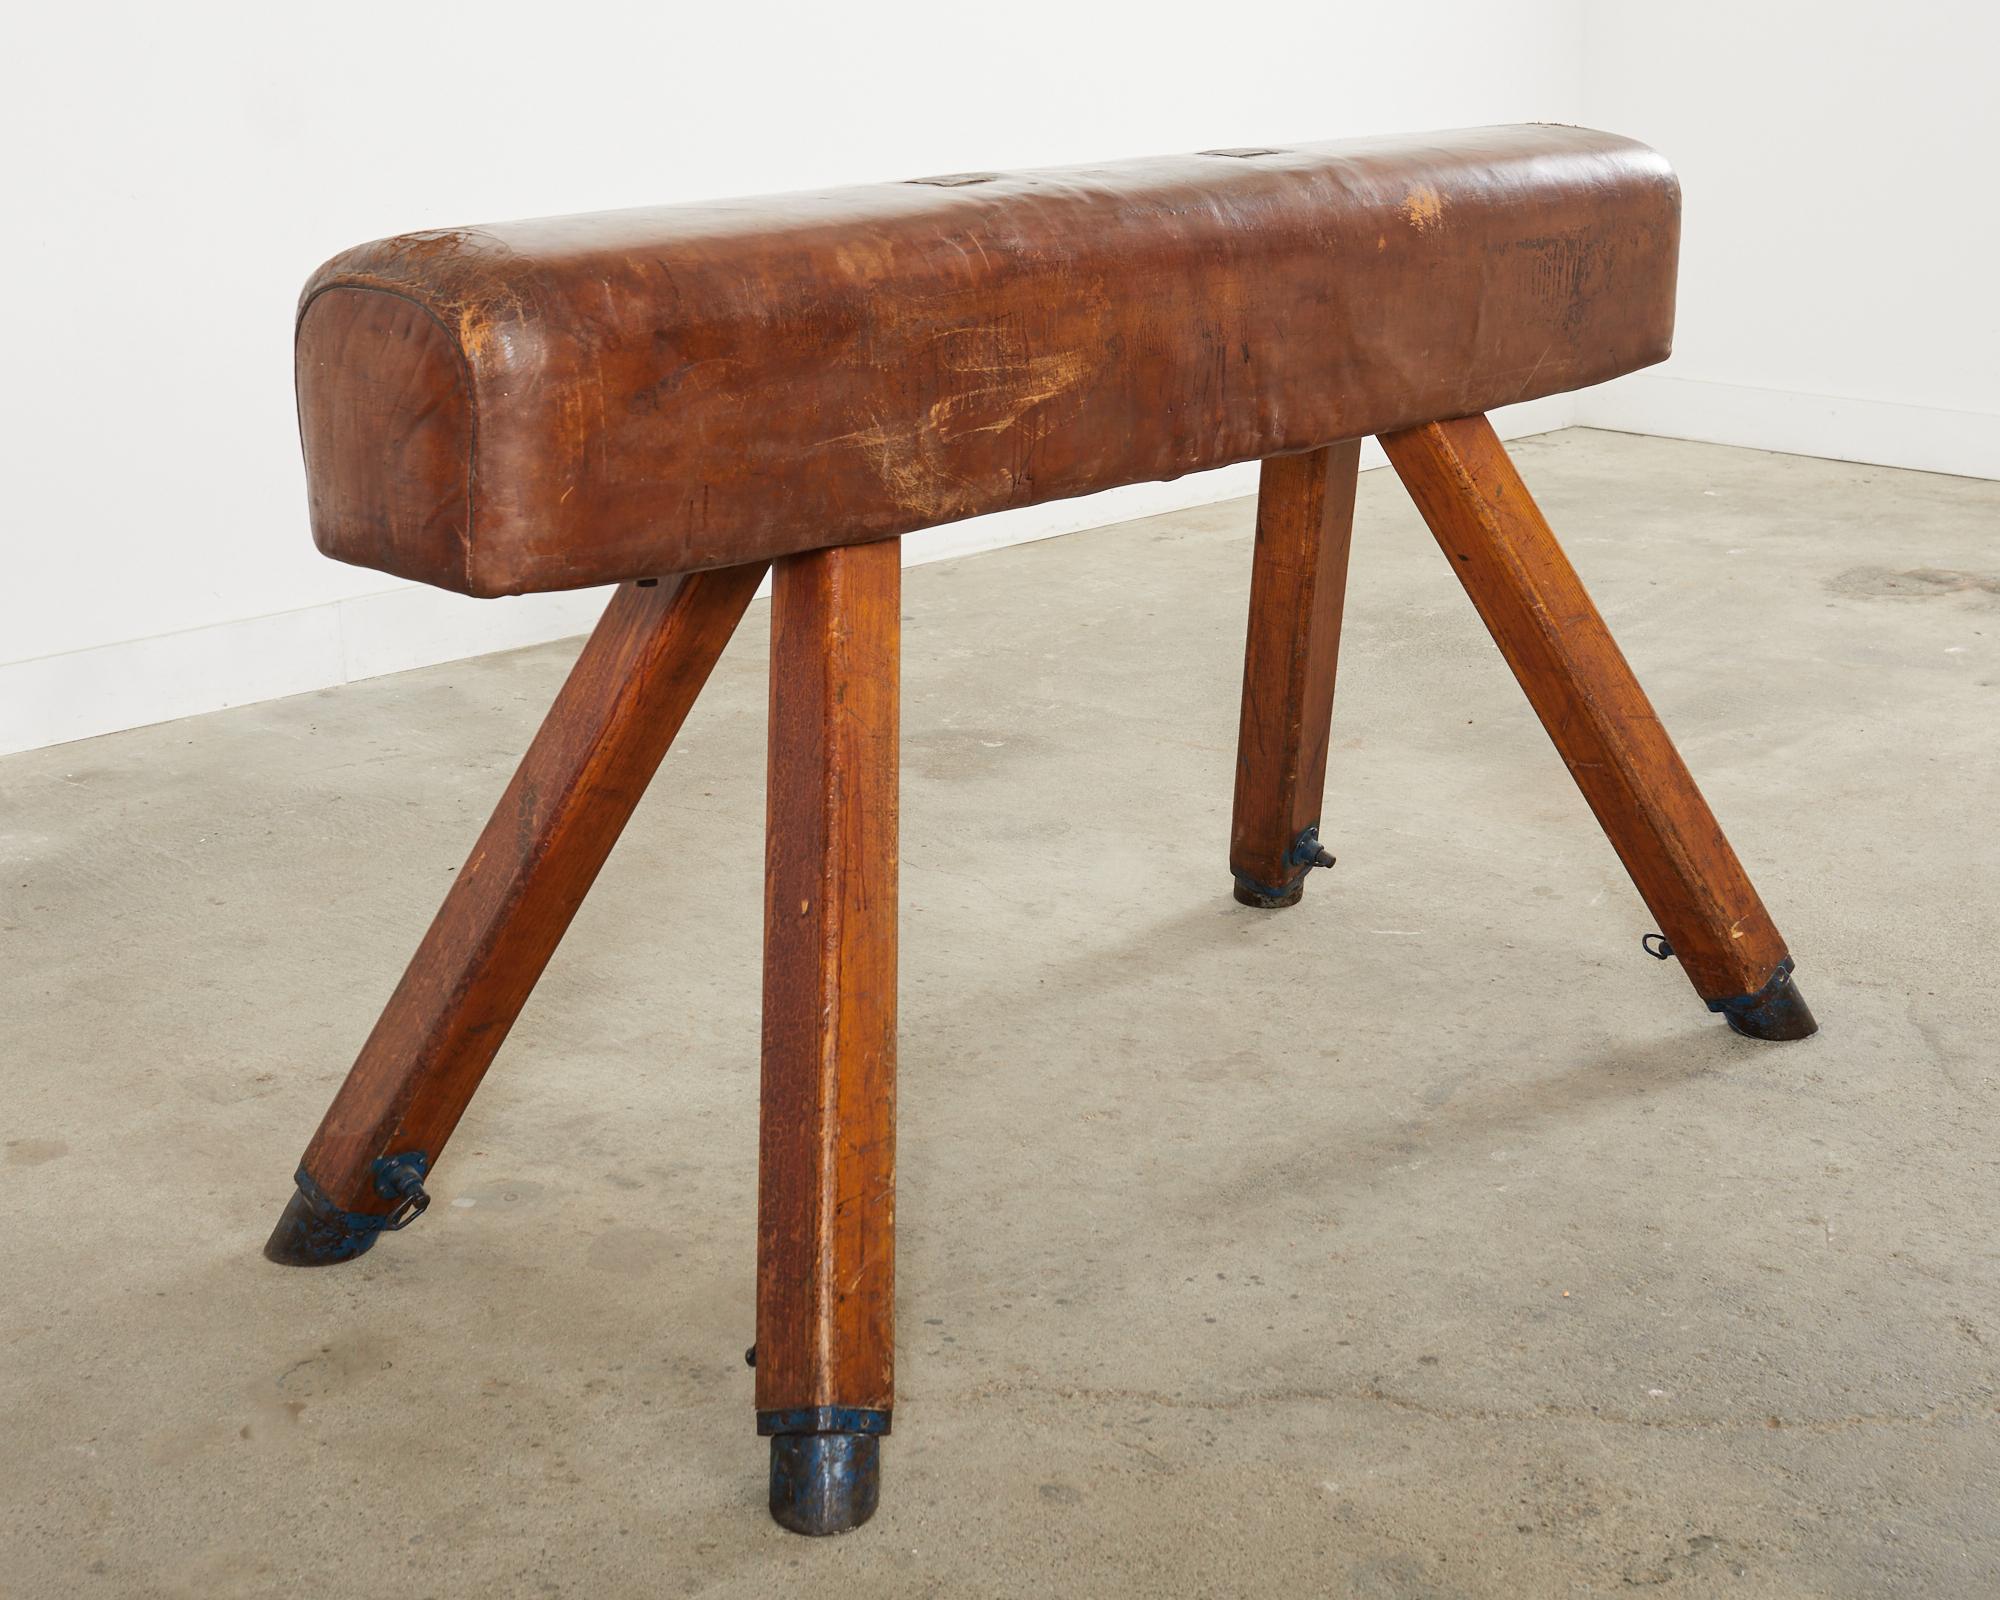 Large mid-century modern gymnastic pommel horse or bench vault. The bench features an oak frame covered with rich patinated cognac leather. The leather has a lovely aged patina with old repairs adding to its charm and character. The canted oak legs